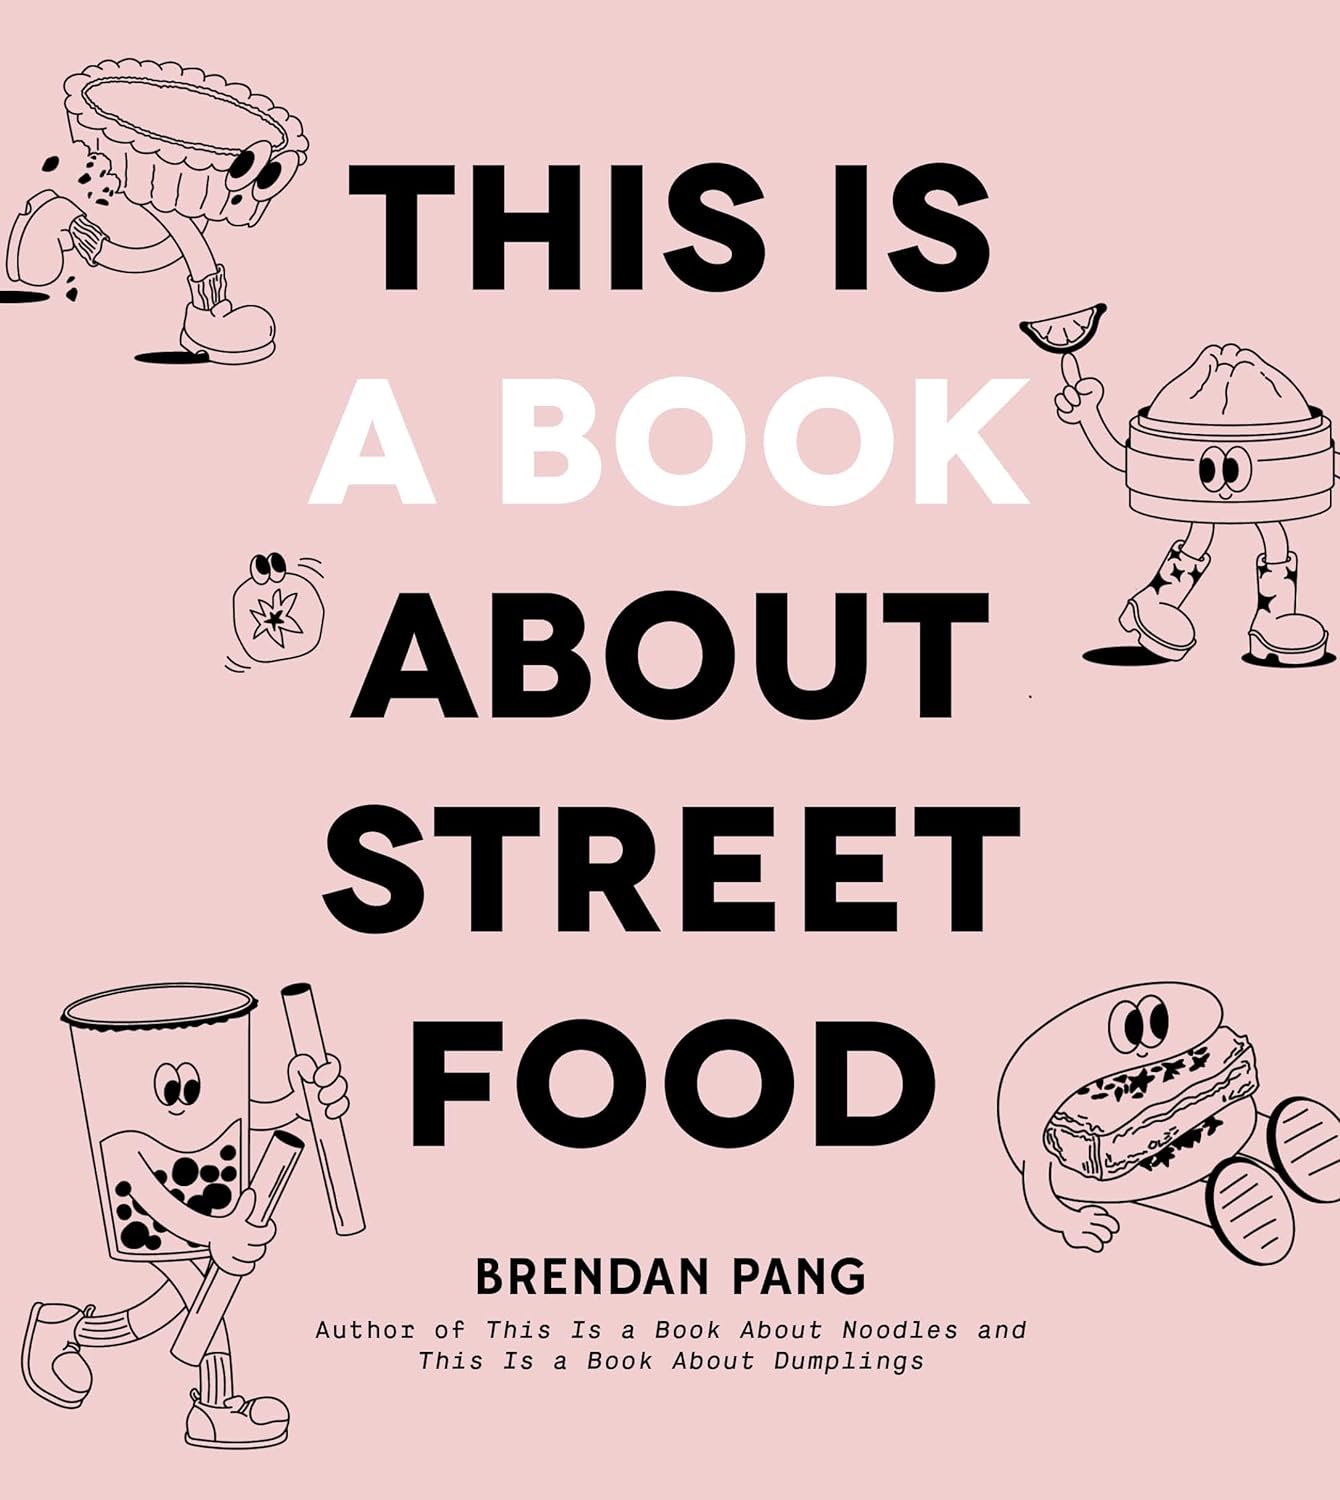 *Pre-order* This Is a Book About Street Food (Brendan Pang)